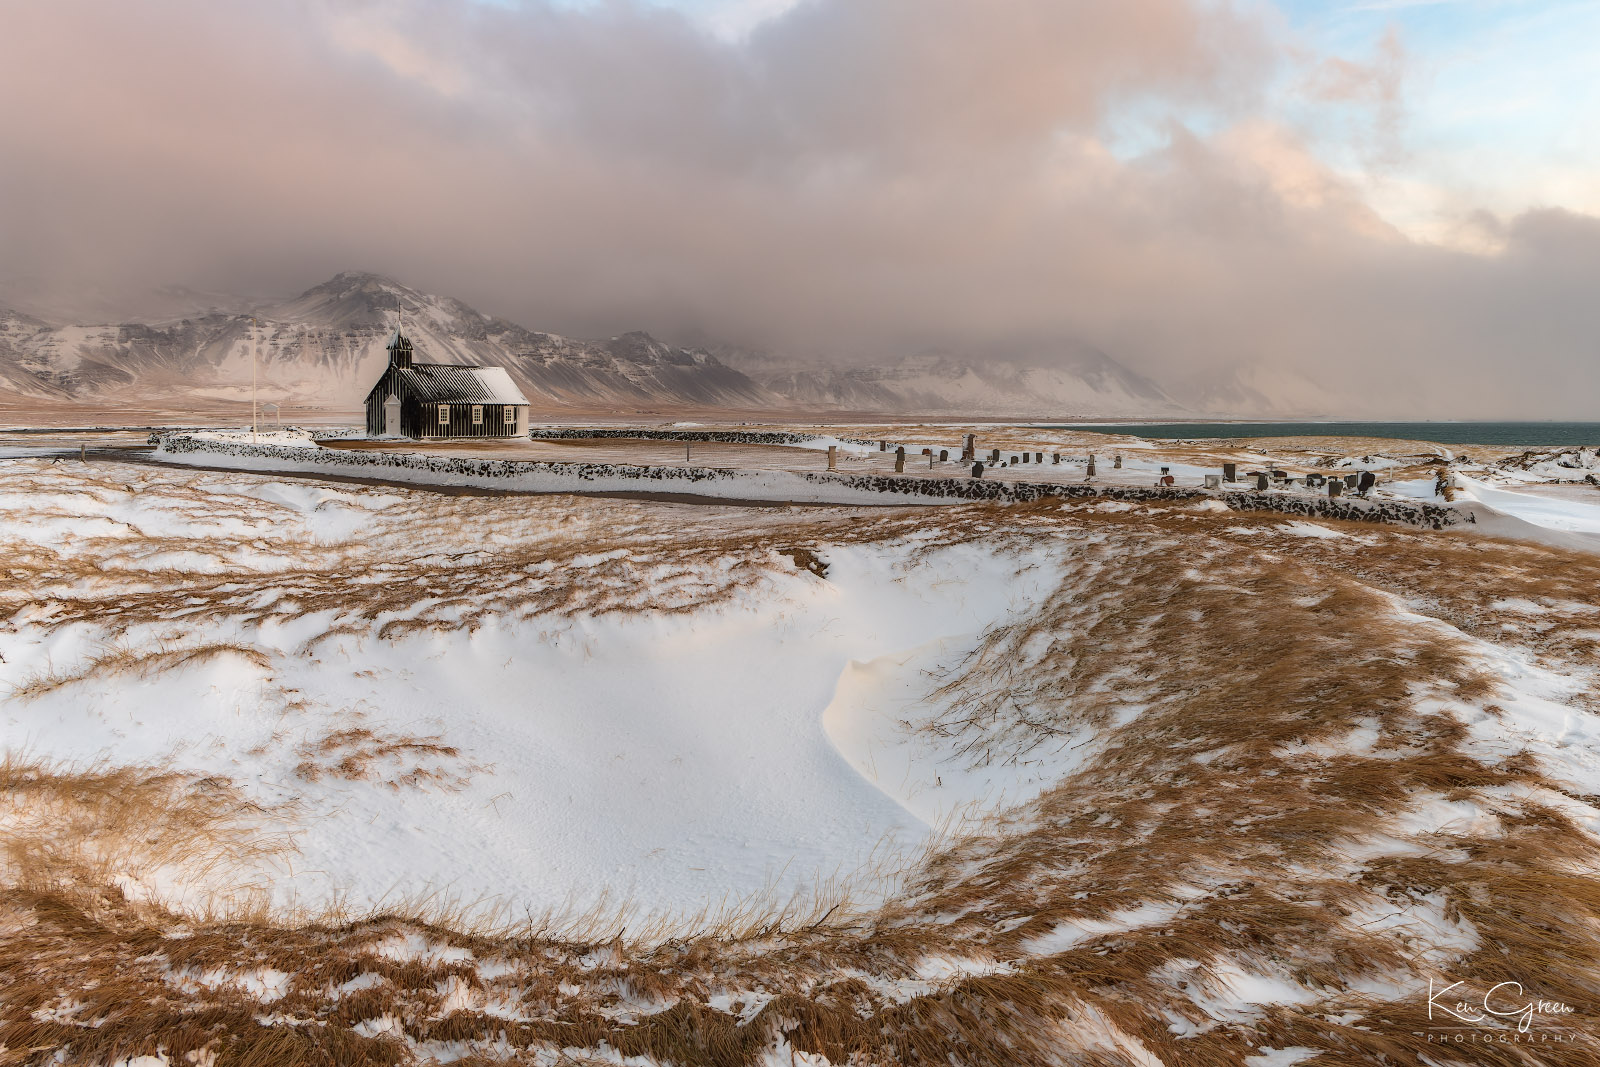 The Budir Black church and cemetery grounds on the Snaefellsnes Peninsula in Iceland.